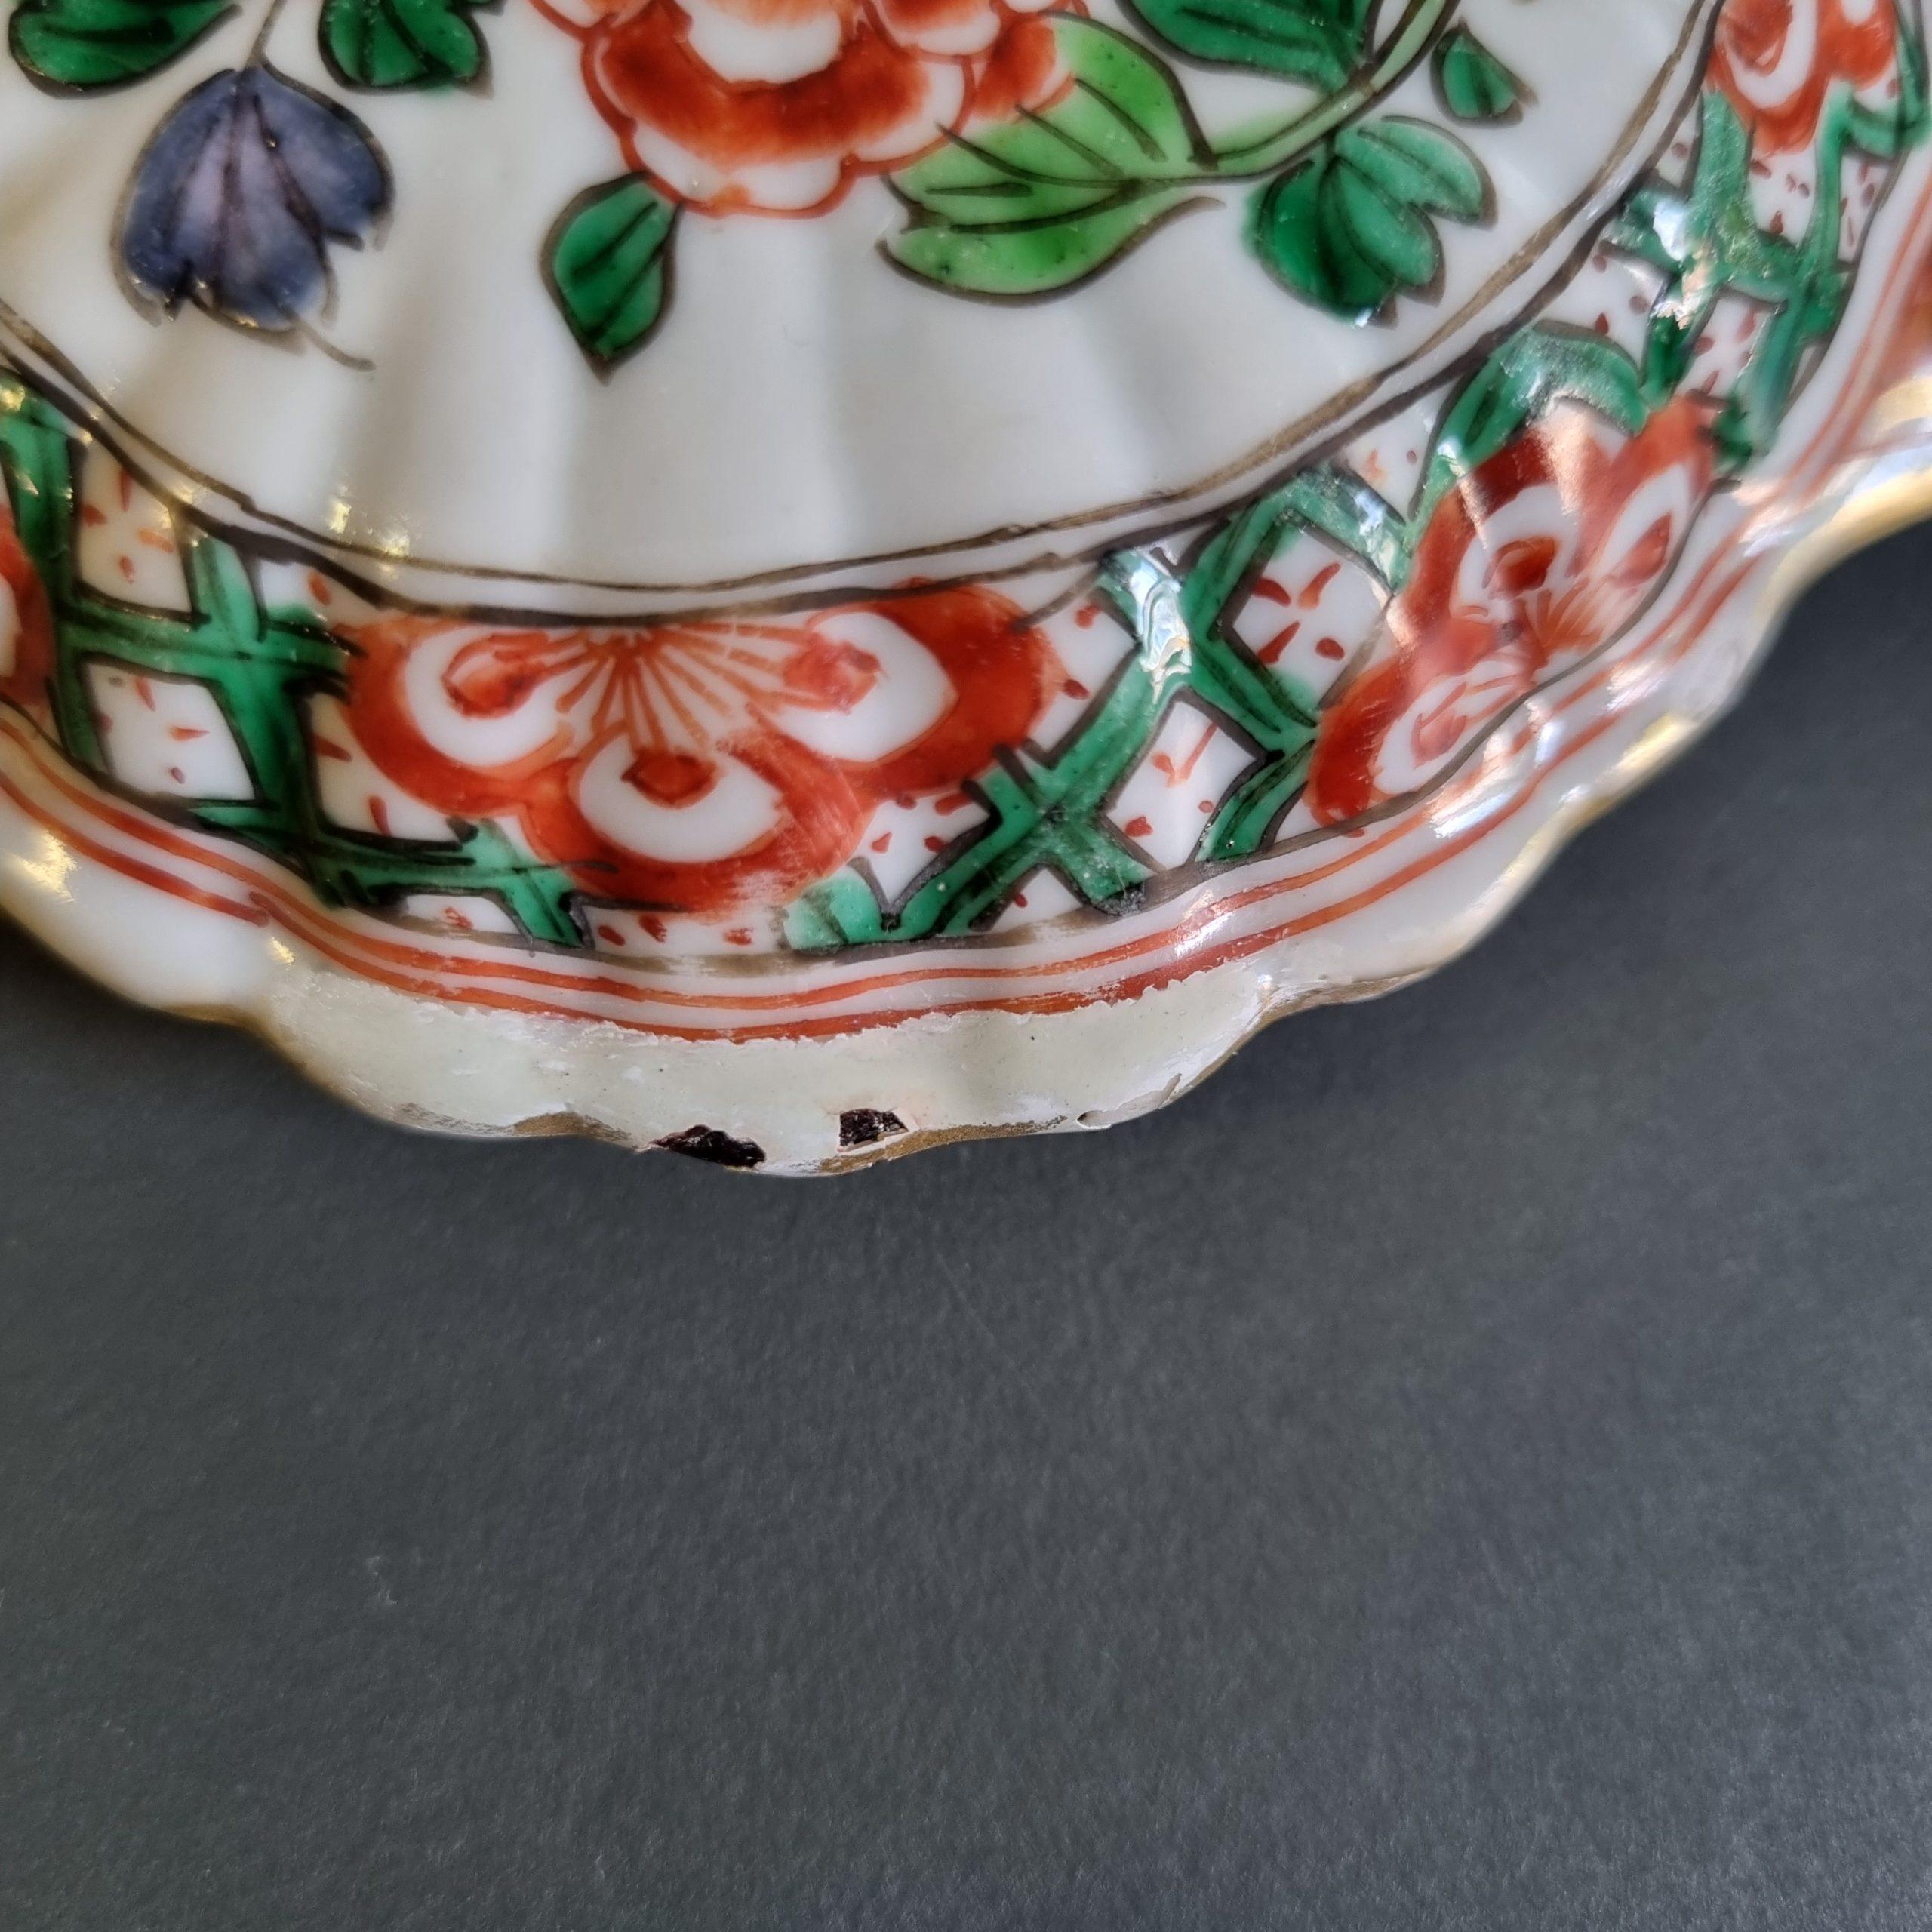 Description
Sharing with you this lovely Kangxi period Tankerd/Jug for water maybe in Famille verte palette. Large piece.
This Chinese porcelain famille verte baluster Jug/Tankard has a nice loop handle and flat original cover.
The body is